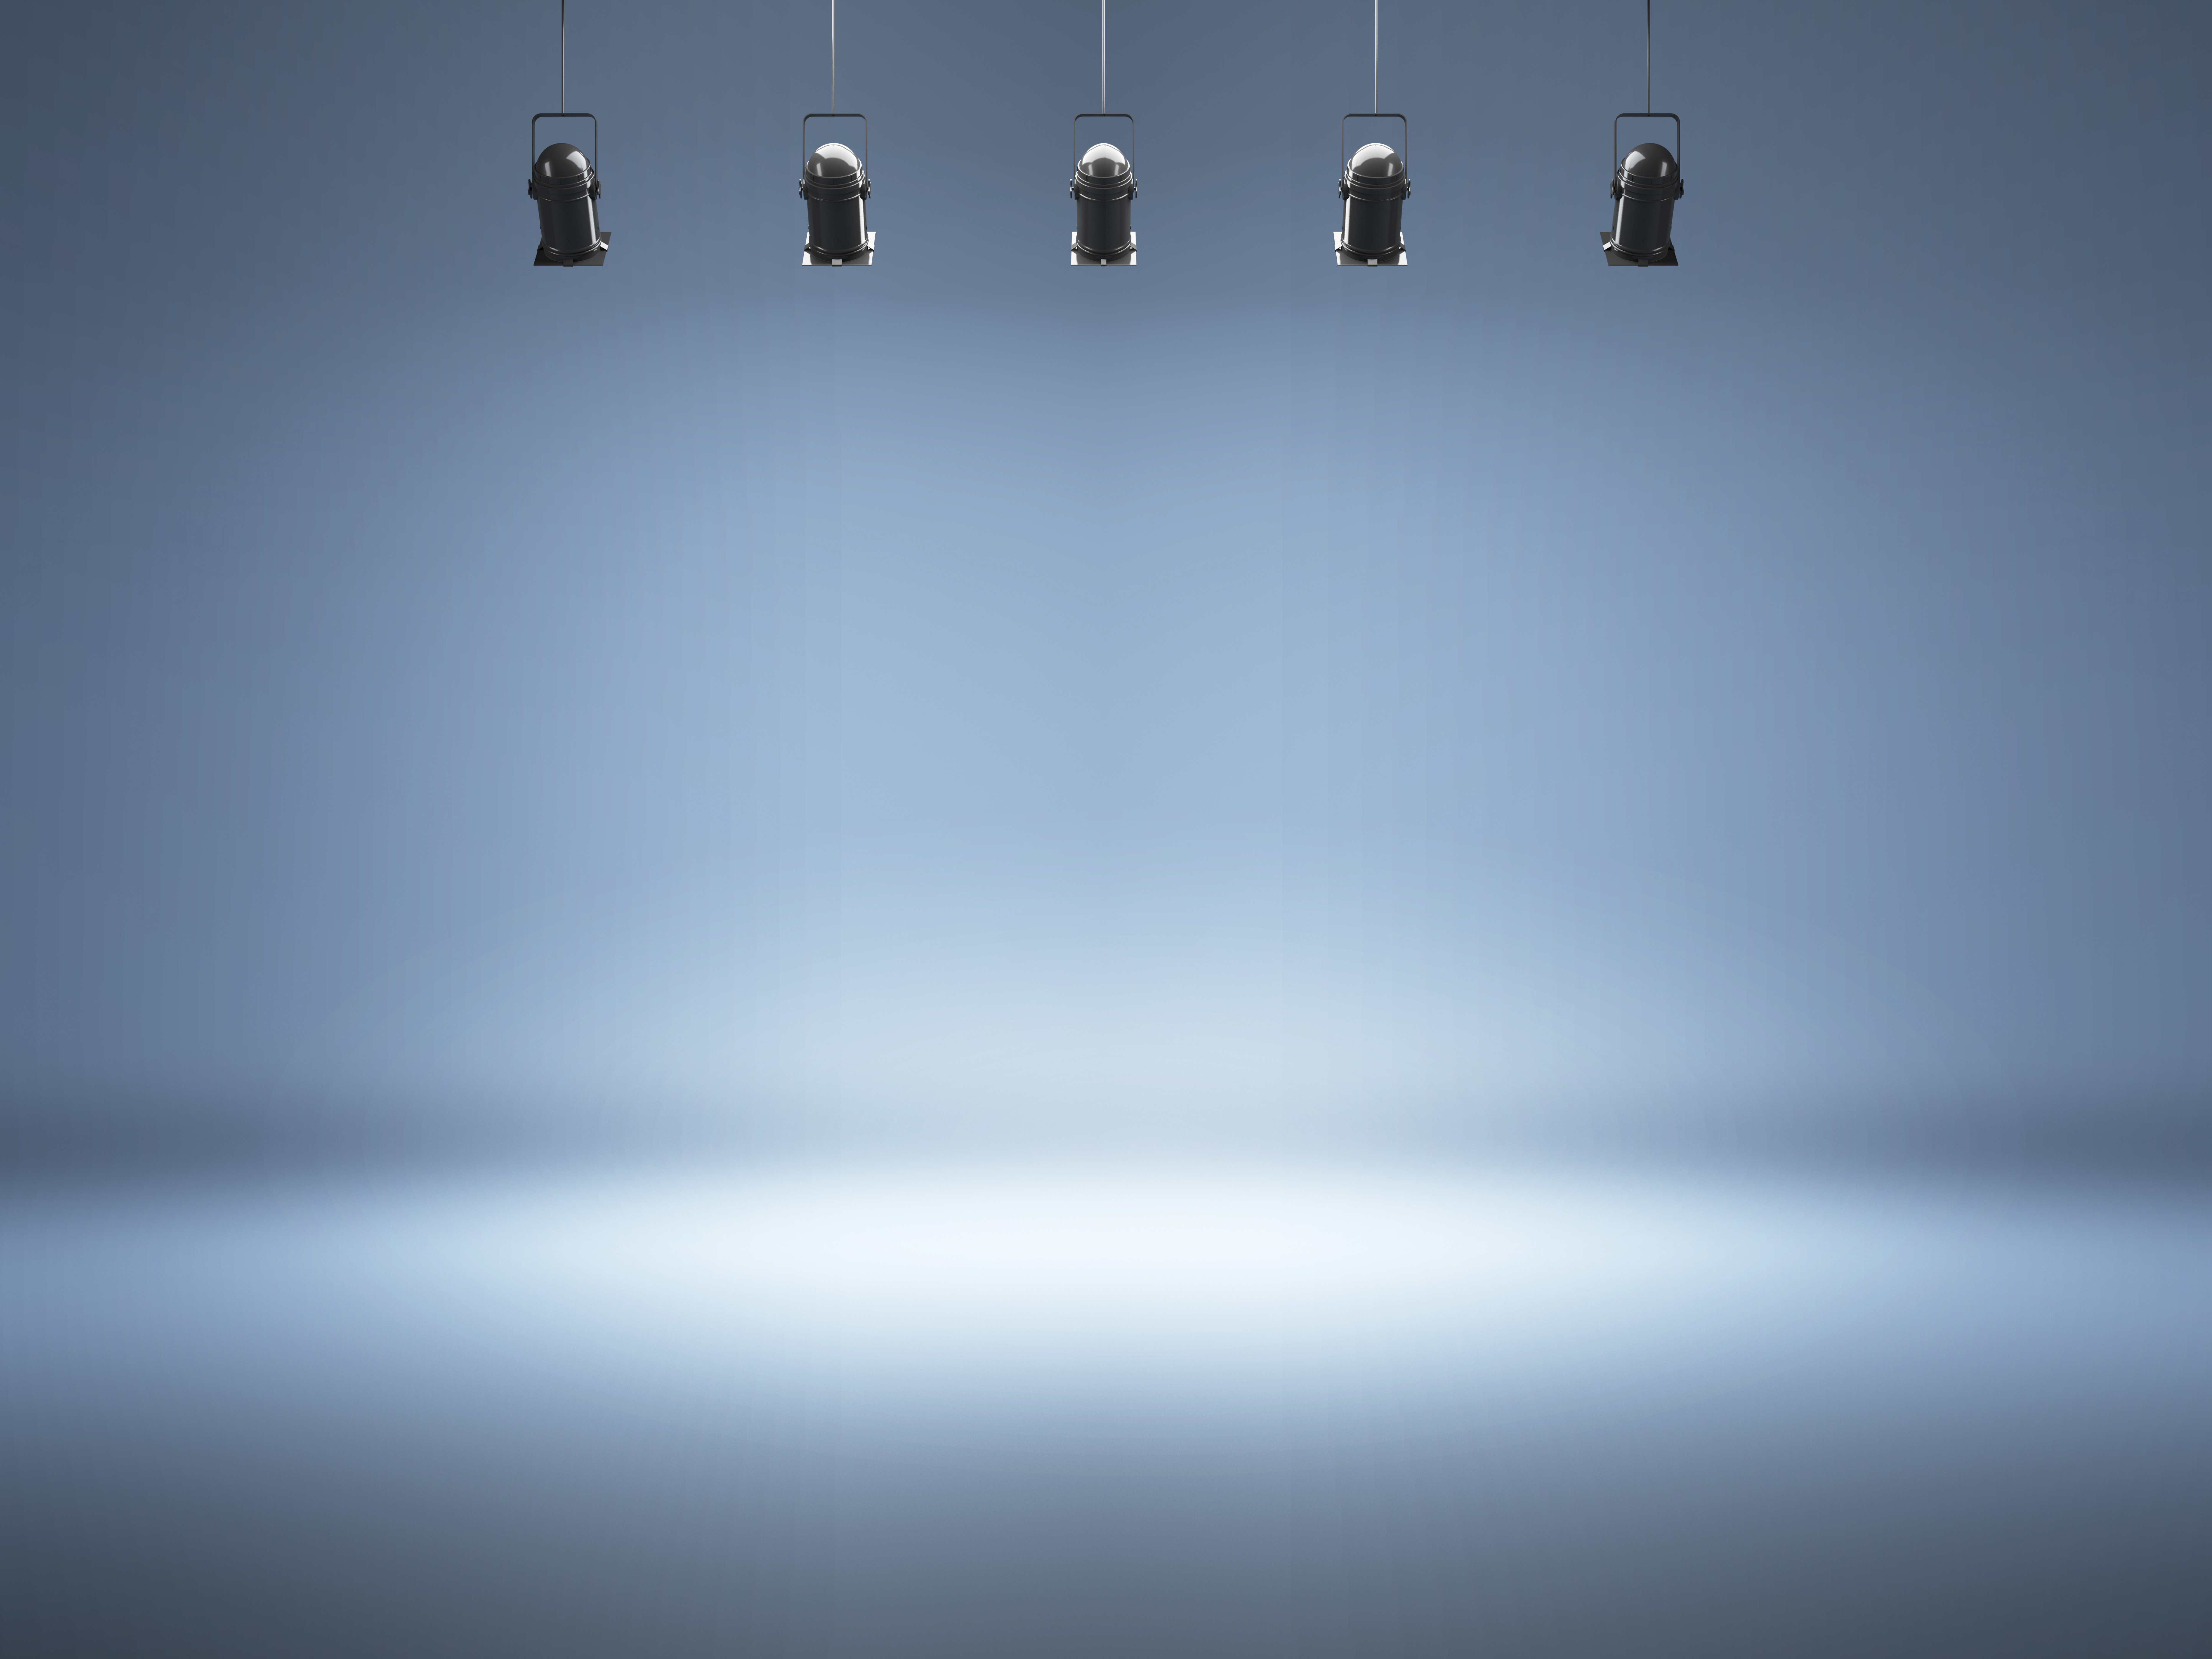 blue spotlight background with lamps